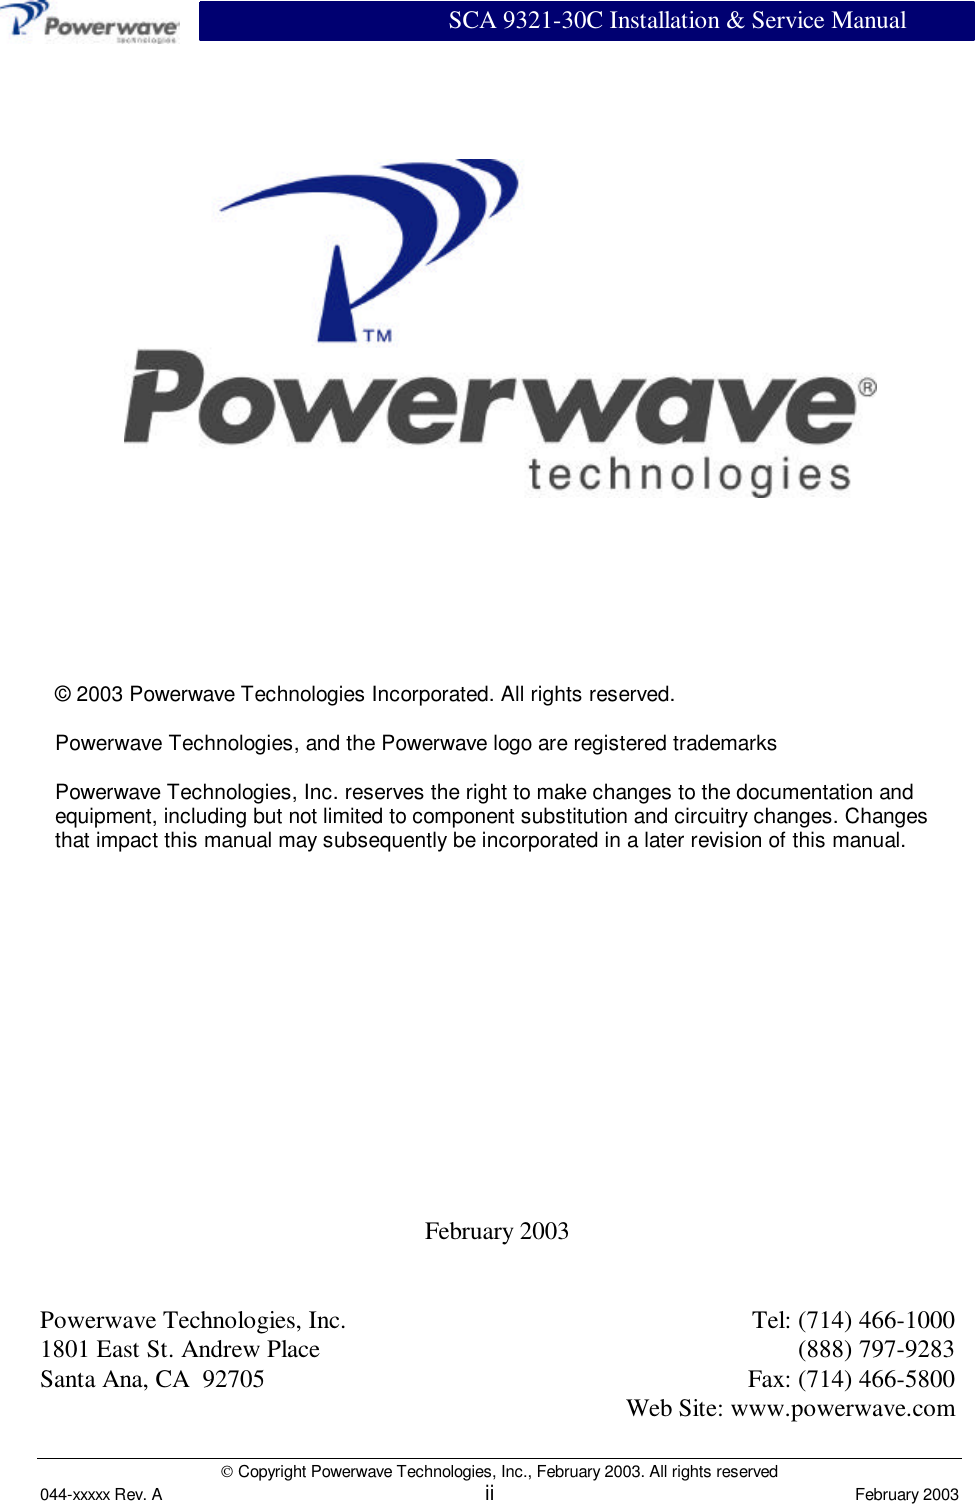                          SCA 9321-30C Installation &amp; Service Manual Copyright Powerwave Technologies, Inc., February 2003. All rights reserved044-xxxxx Rev. A ii February 2003February 2003Powerwave Technologies, Inc. Tel: (714) 466-10001801 East St. Andrew Place (888) 797-9283Santa Ana, CA  92705 Fax: (714) 466-5800Web Site: www.powerwave.com© 2003 Powerwave Technologies Incorporated. All rights reserved.Powerwave Technologies, and the Powerwave logo are registered trademarksPowerwave Technologies, Inc. reserves the right to make changes to the documentation andequipment, including but not limited to component substitution and circuitry changes. Changesthat impact this manual may subsequently be incorporated in a later revision of this manual.